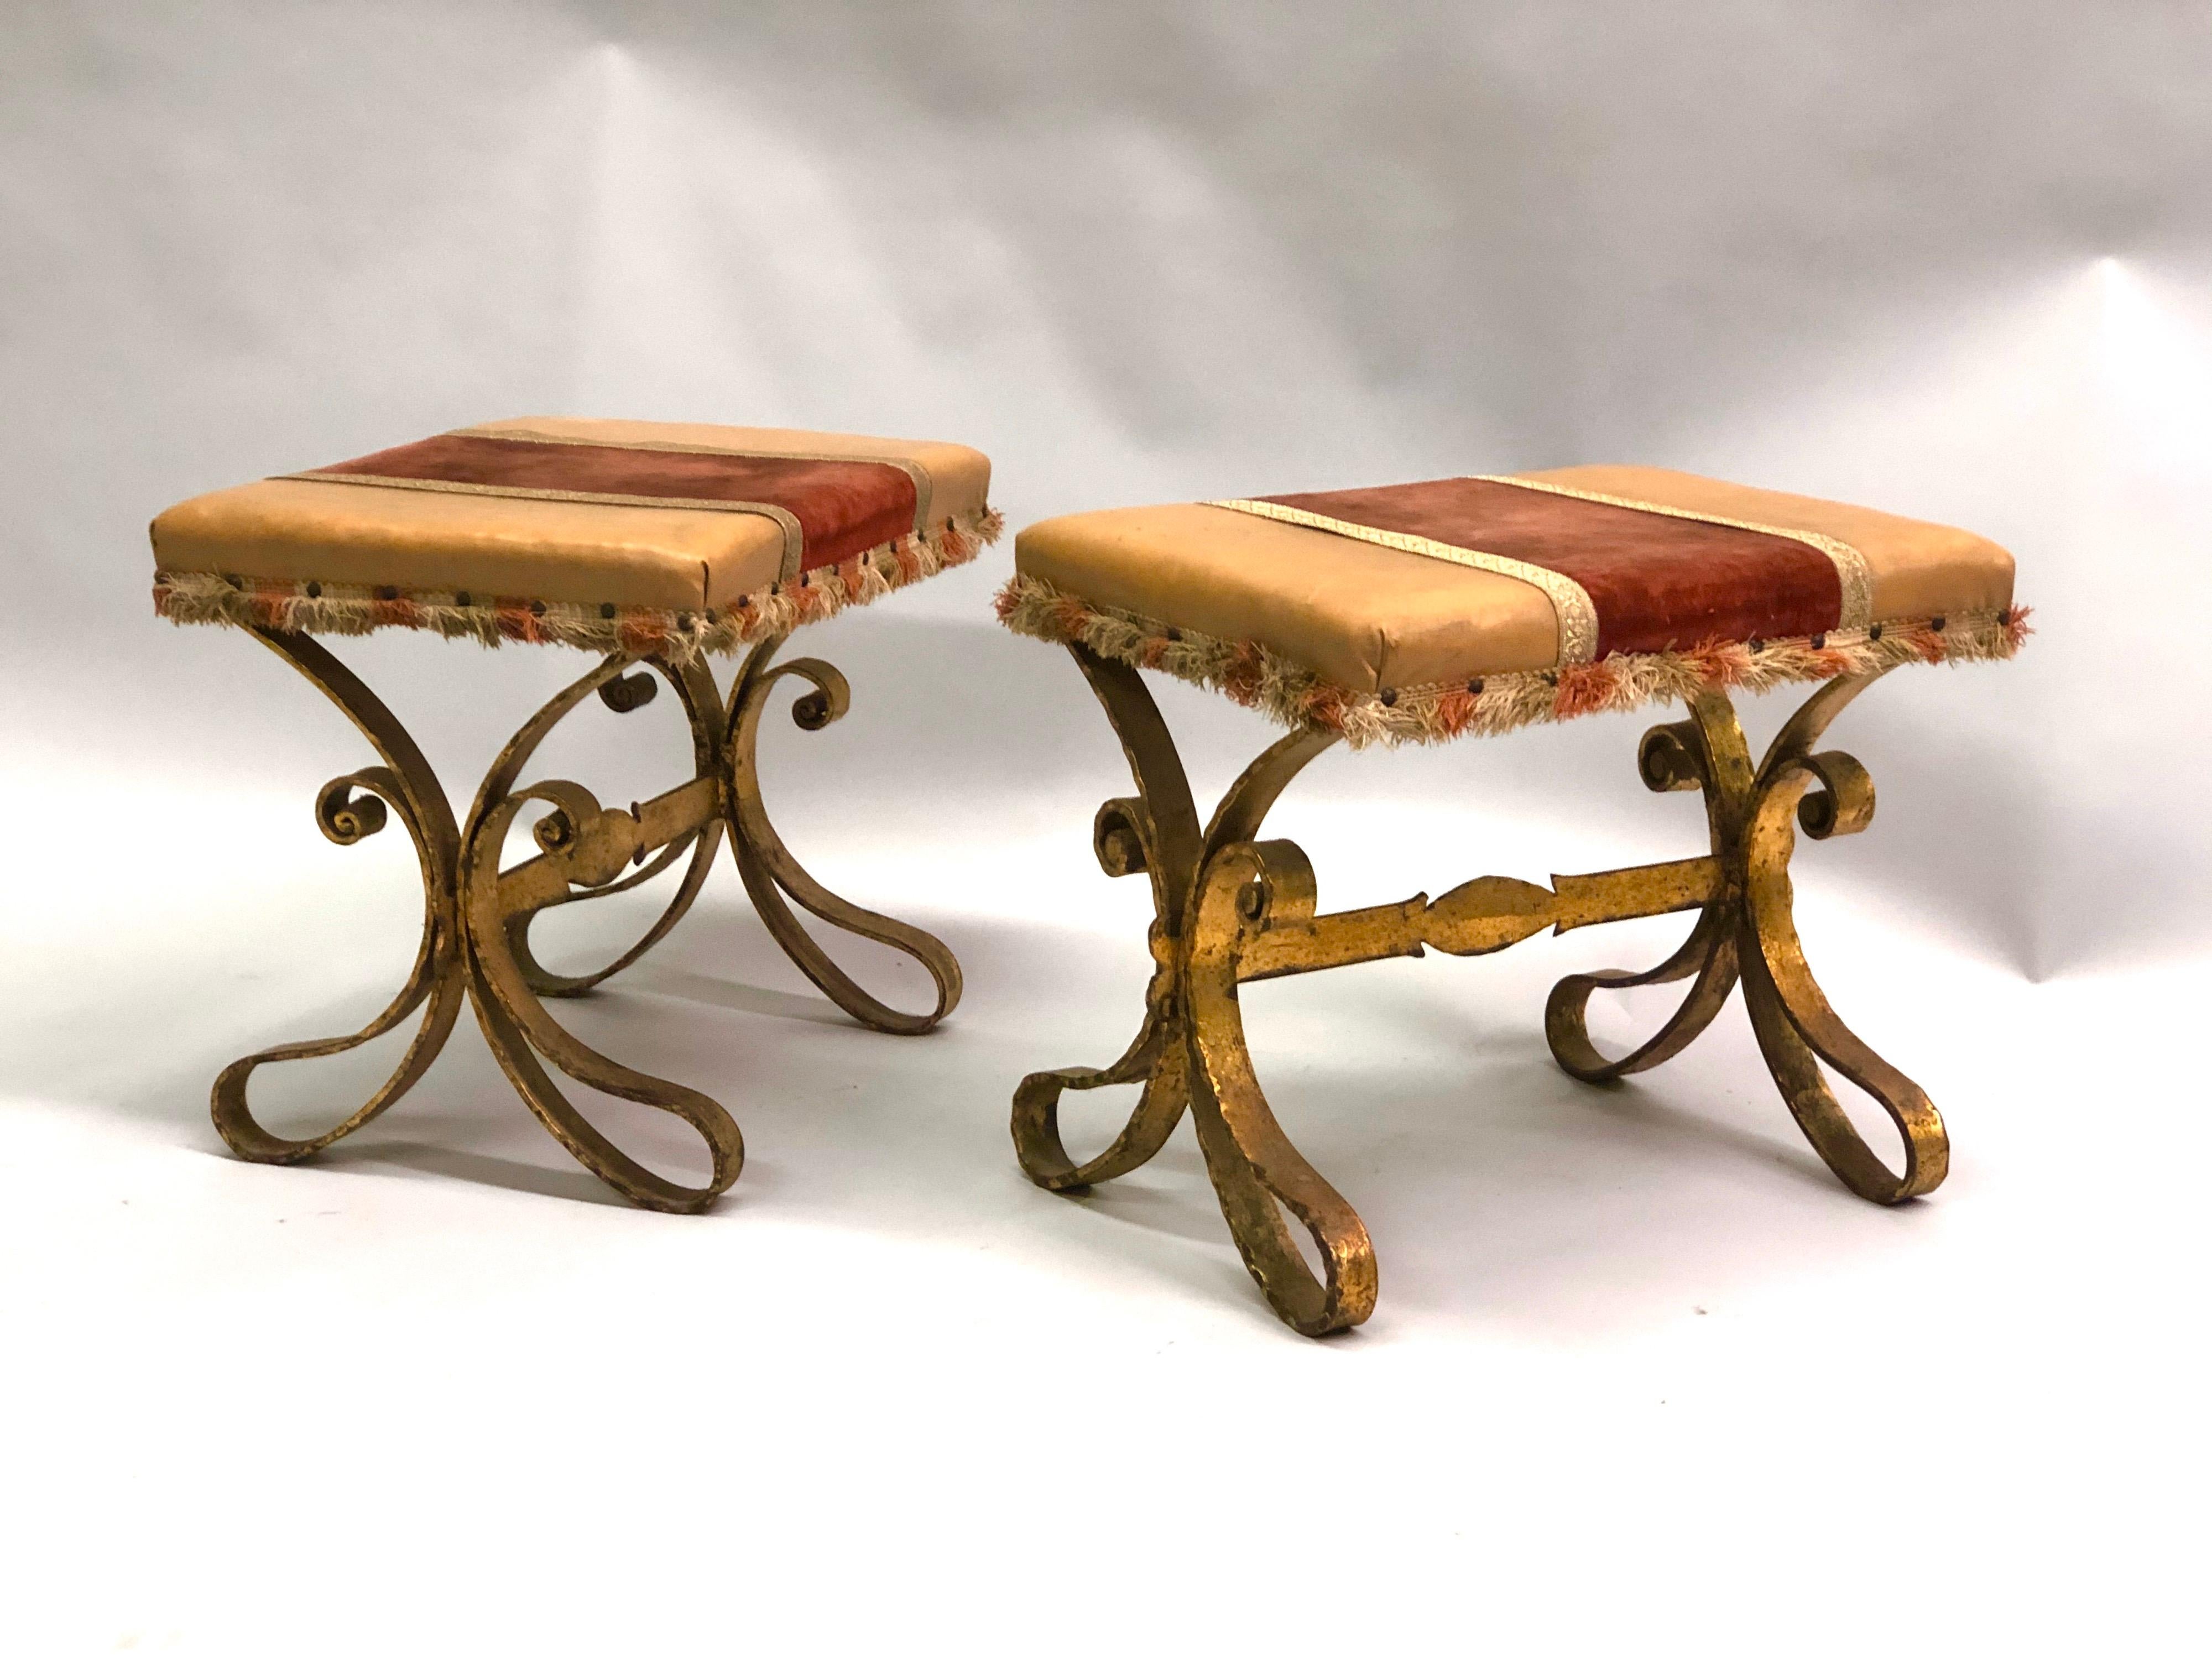 Pair of French Mid-Century Modern gilt wrought iron and leather benches or stools or ottomans in the style of Gilbert Poillerat. 

The pieces are handmade in hand-hammered iron and hand gilt. Seats are partially covered in leather.

References: